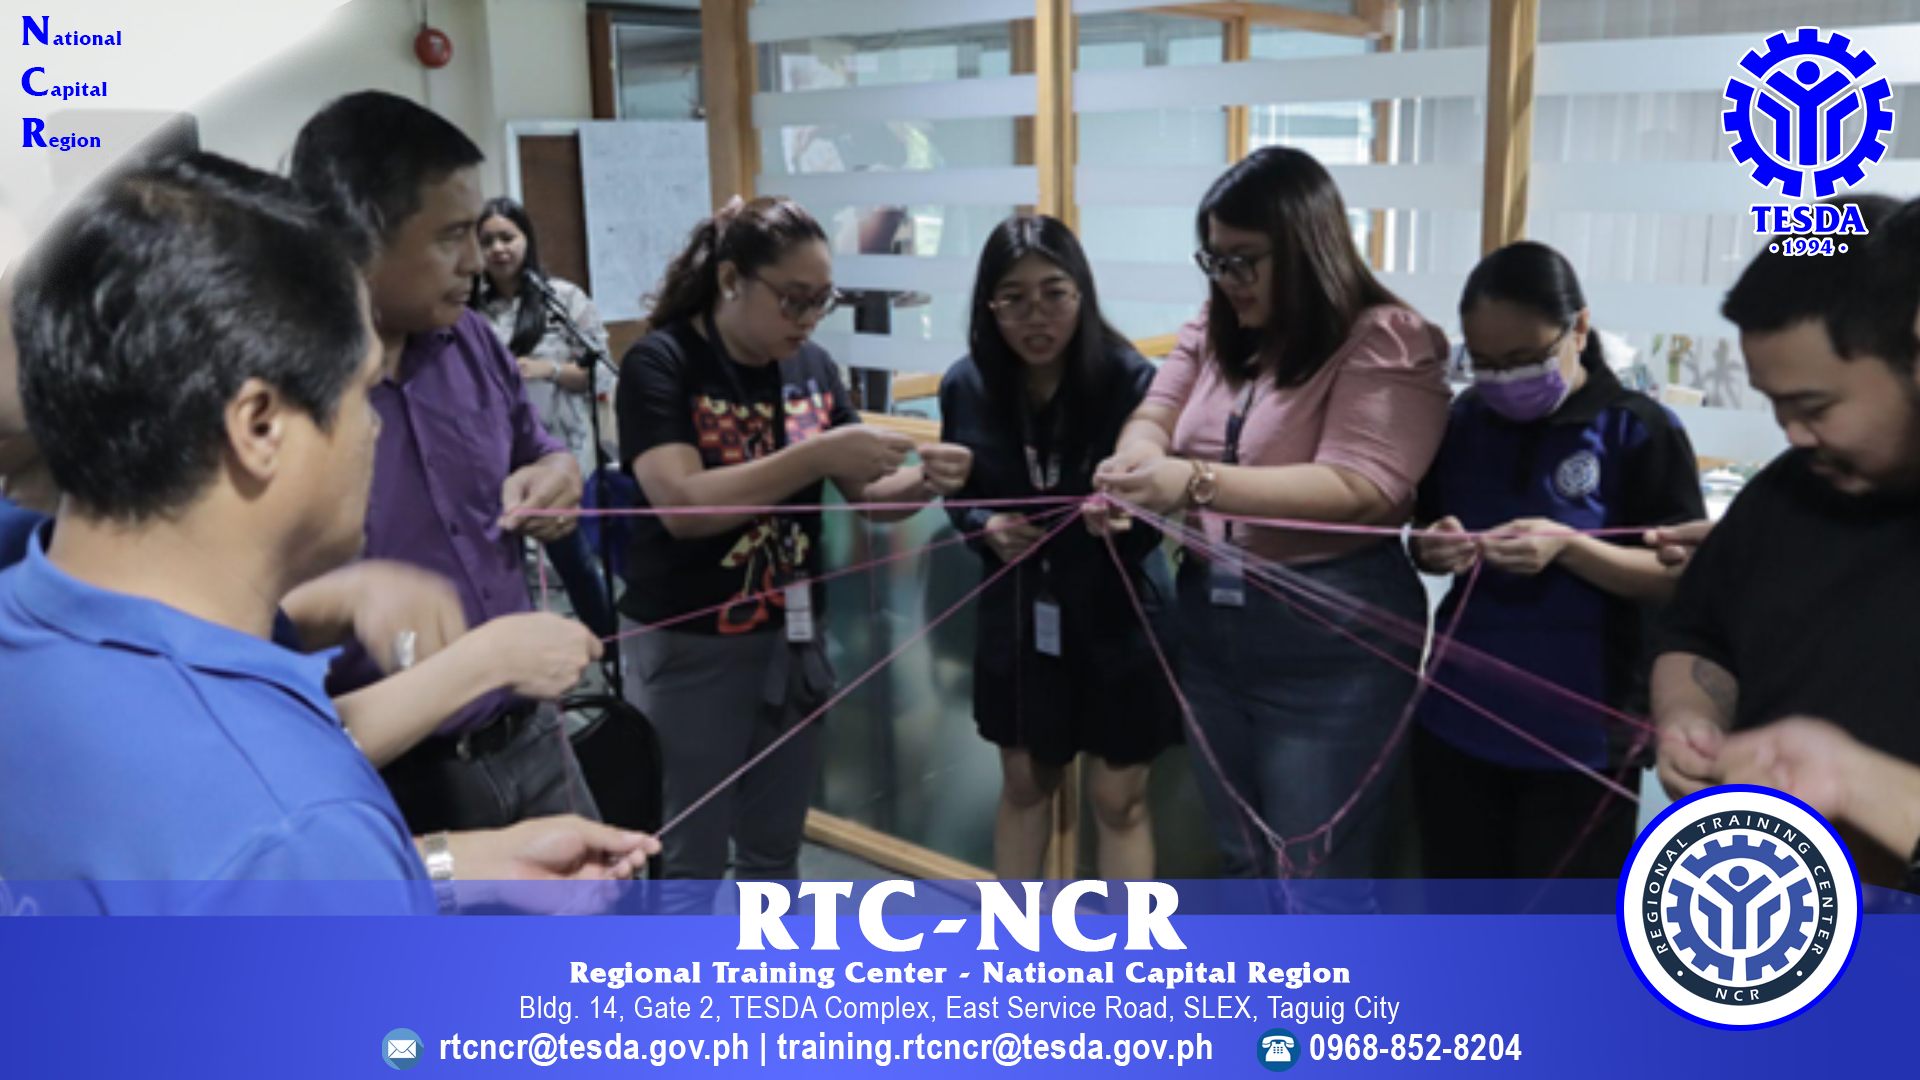 RTC-NCR conducts Preparation and Development of Vision, Mission, Goals and Objective (VMGO) of qualification offered